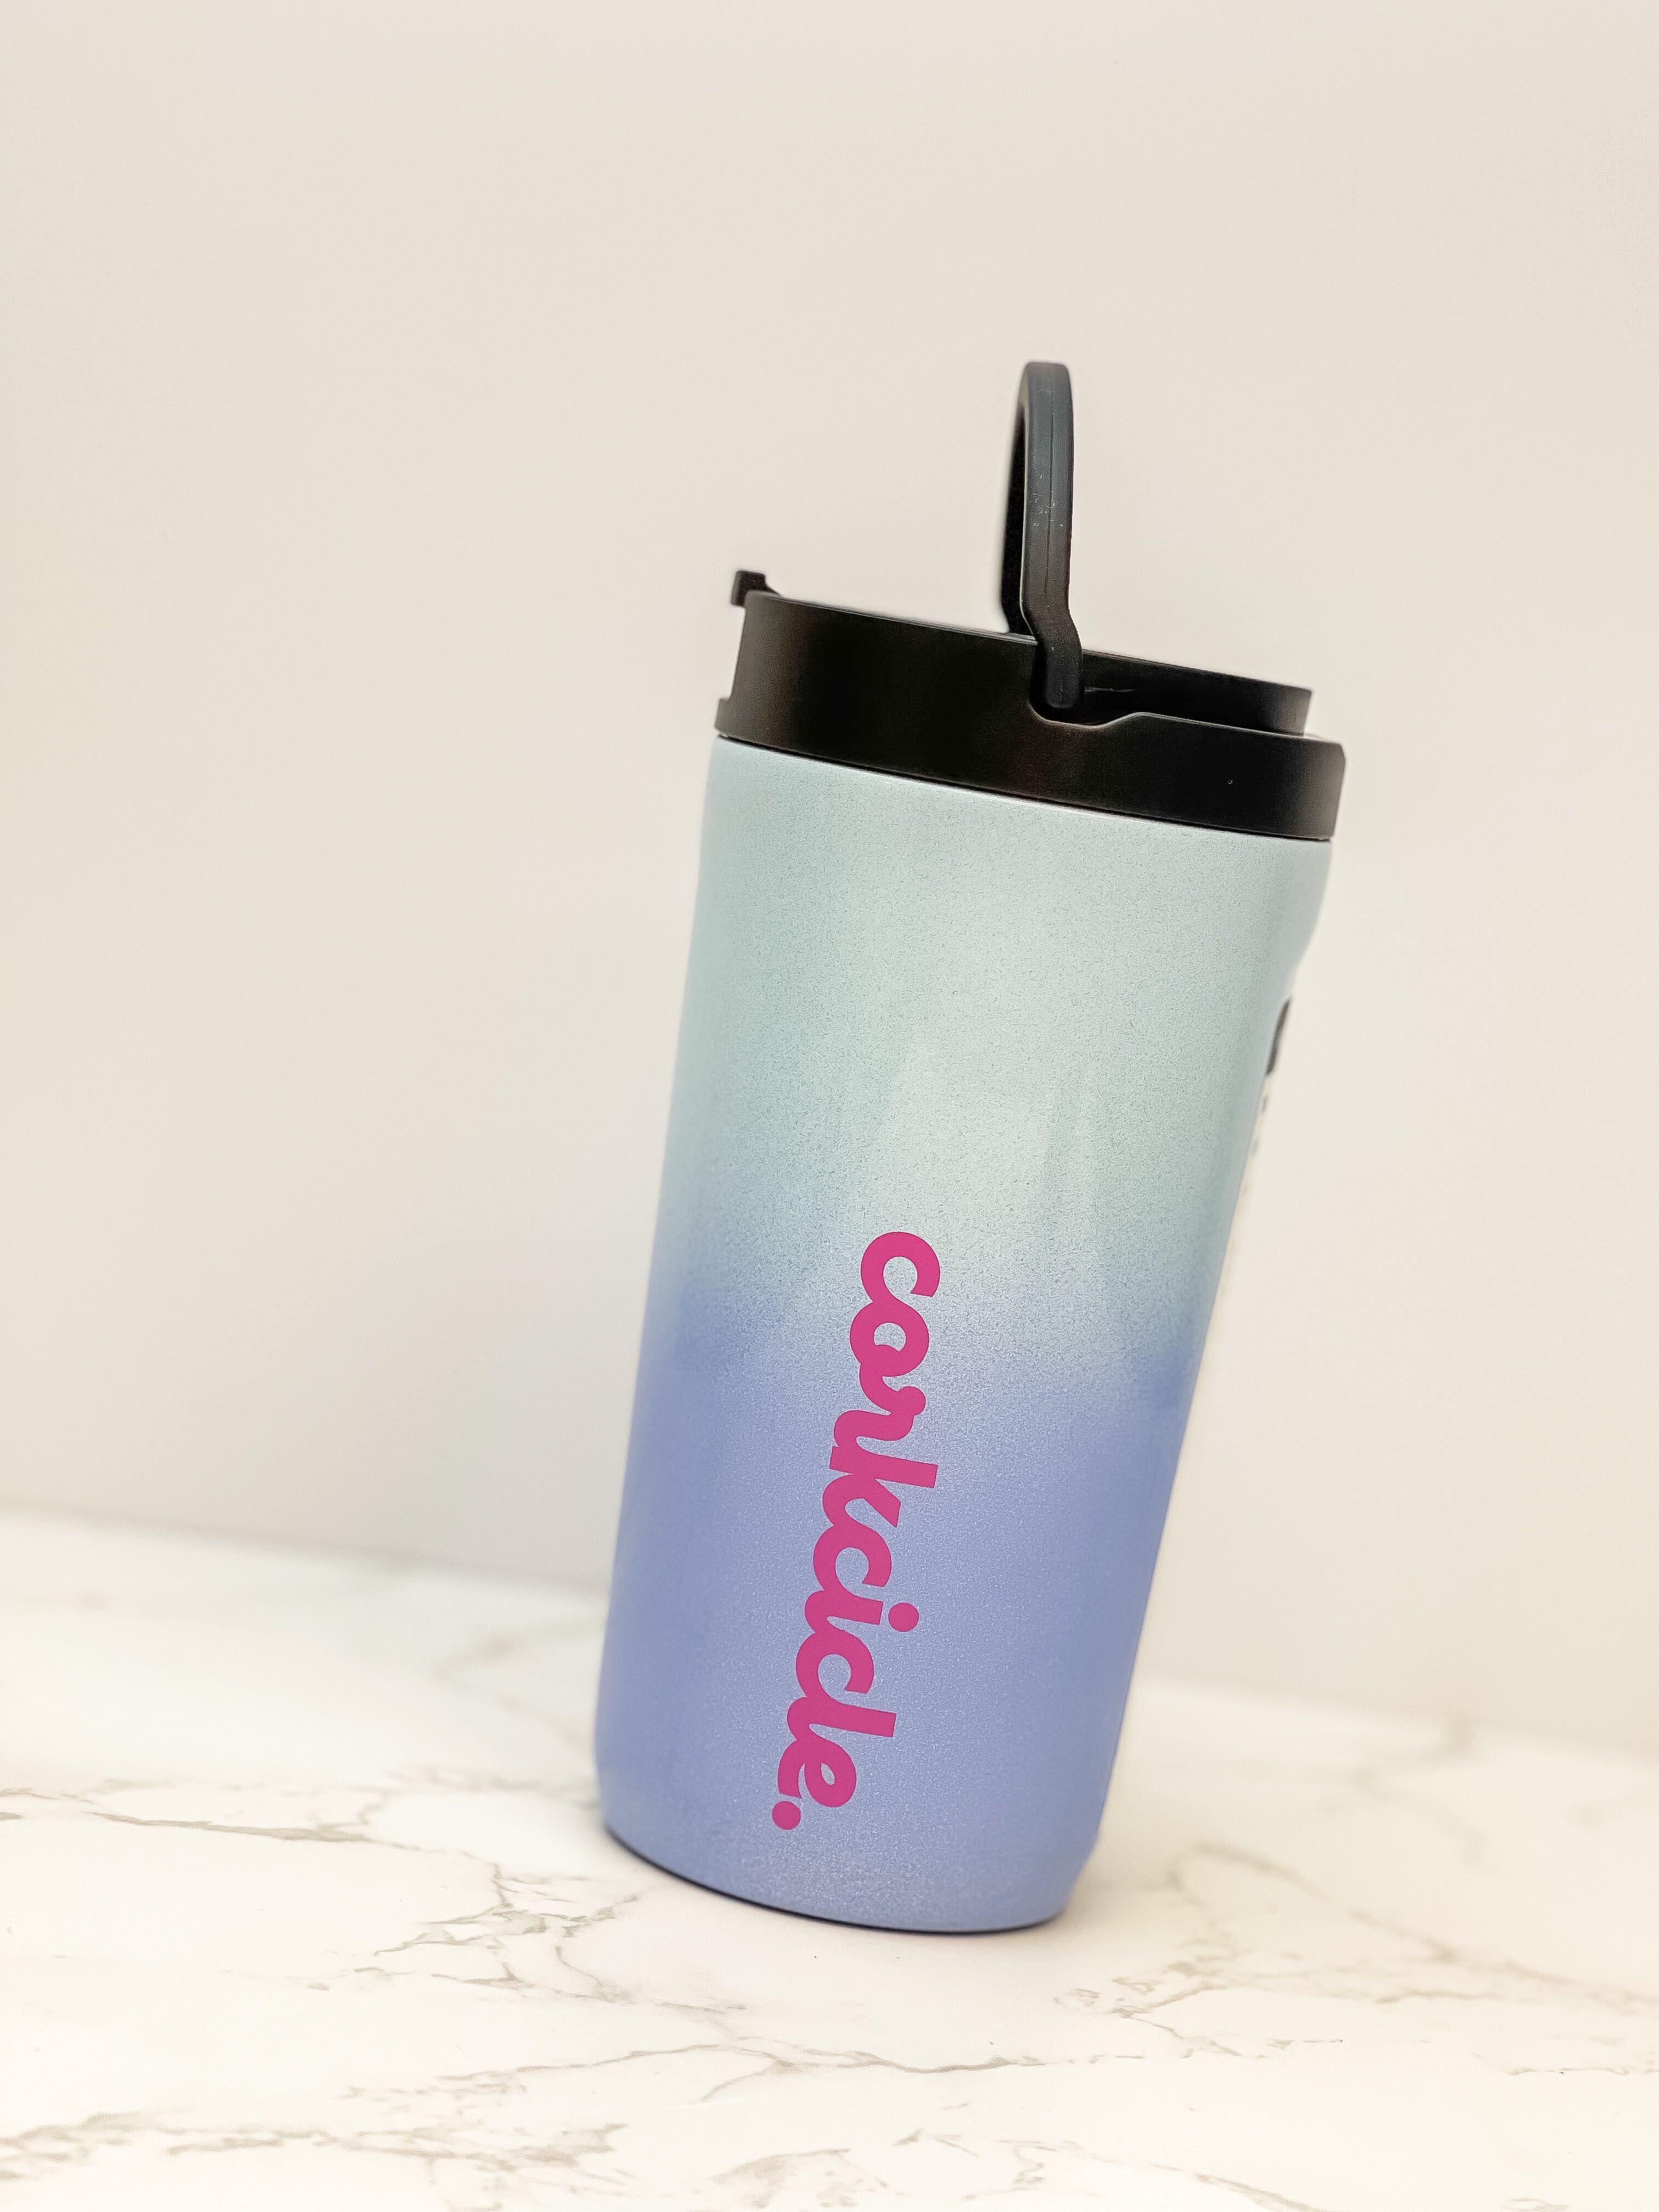 Ombre Ocean 12 oz Stainless Steel Kids Cup by Corkcicle